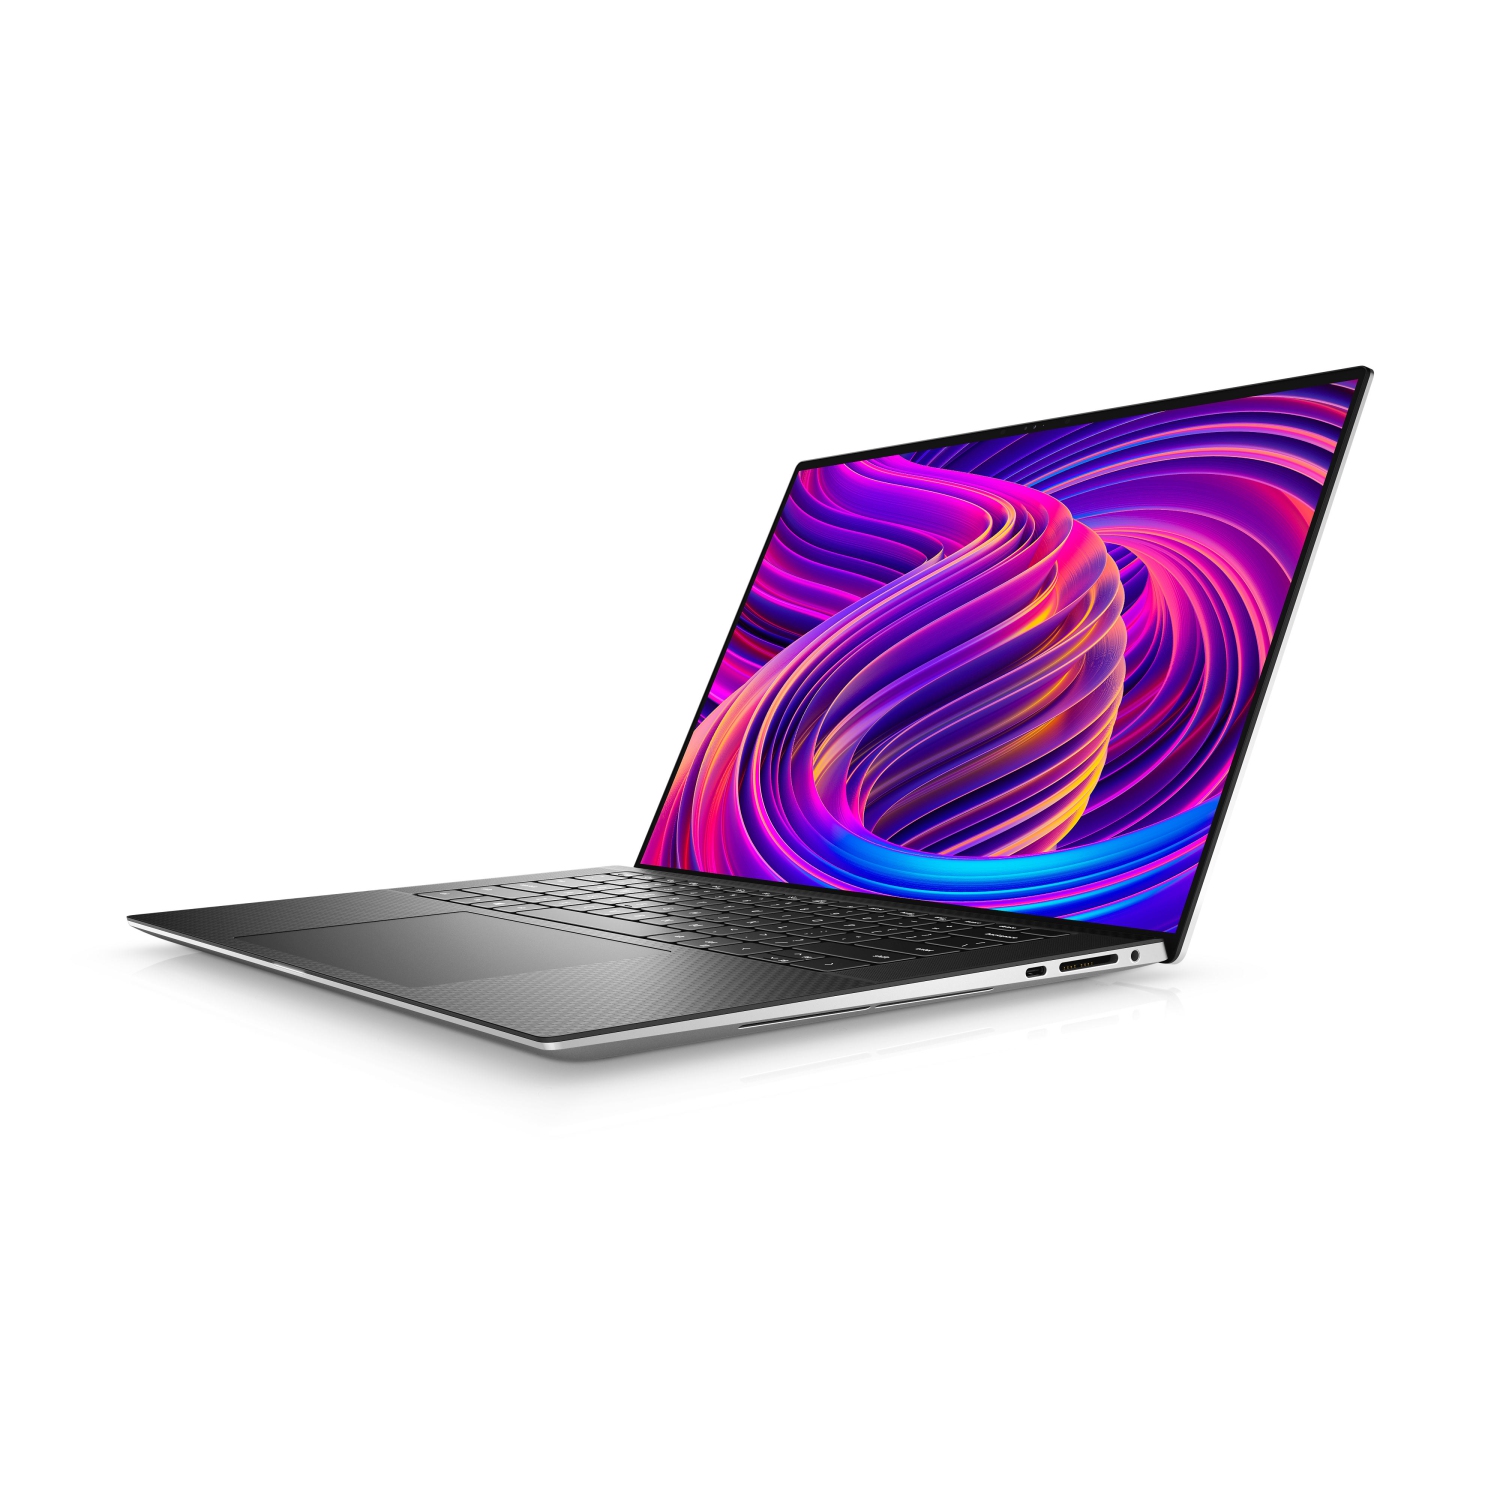 Refurbished (Excellent) - Dell XPS 15 9510 Laptop (2021), 15.6" 4K Touch, Core i7 - 1TB SSD - 16GB RAM - 3050 Ti, 8 Cores @ 4.6 GHz - 11th Gen CPU Certified Refurbished